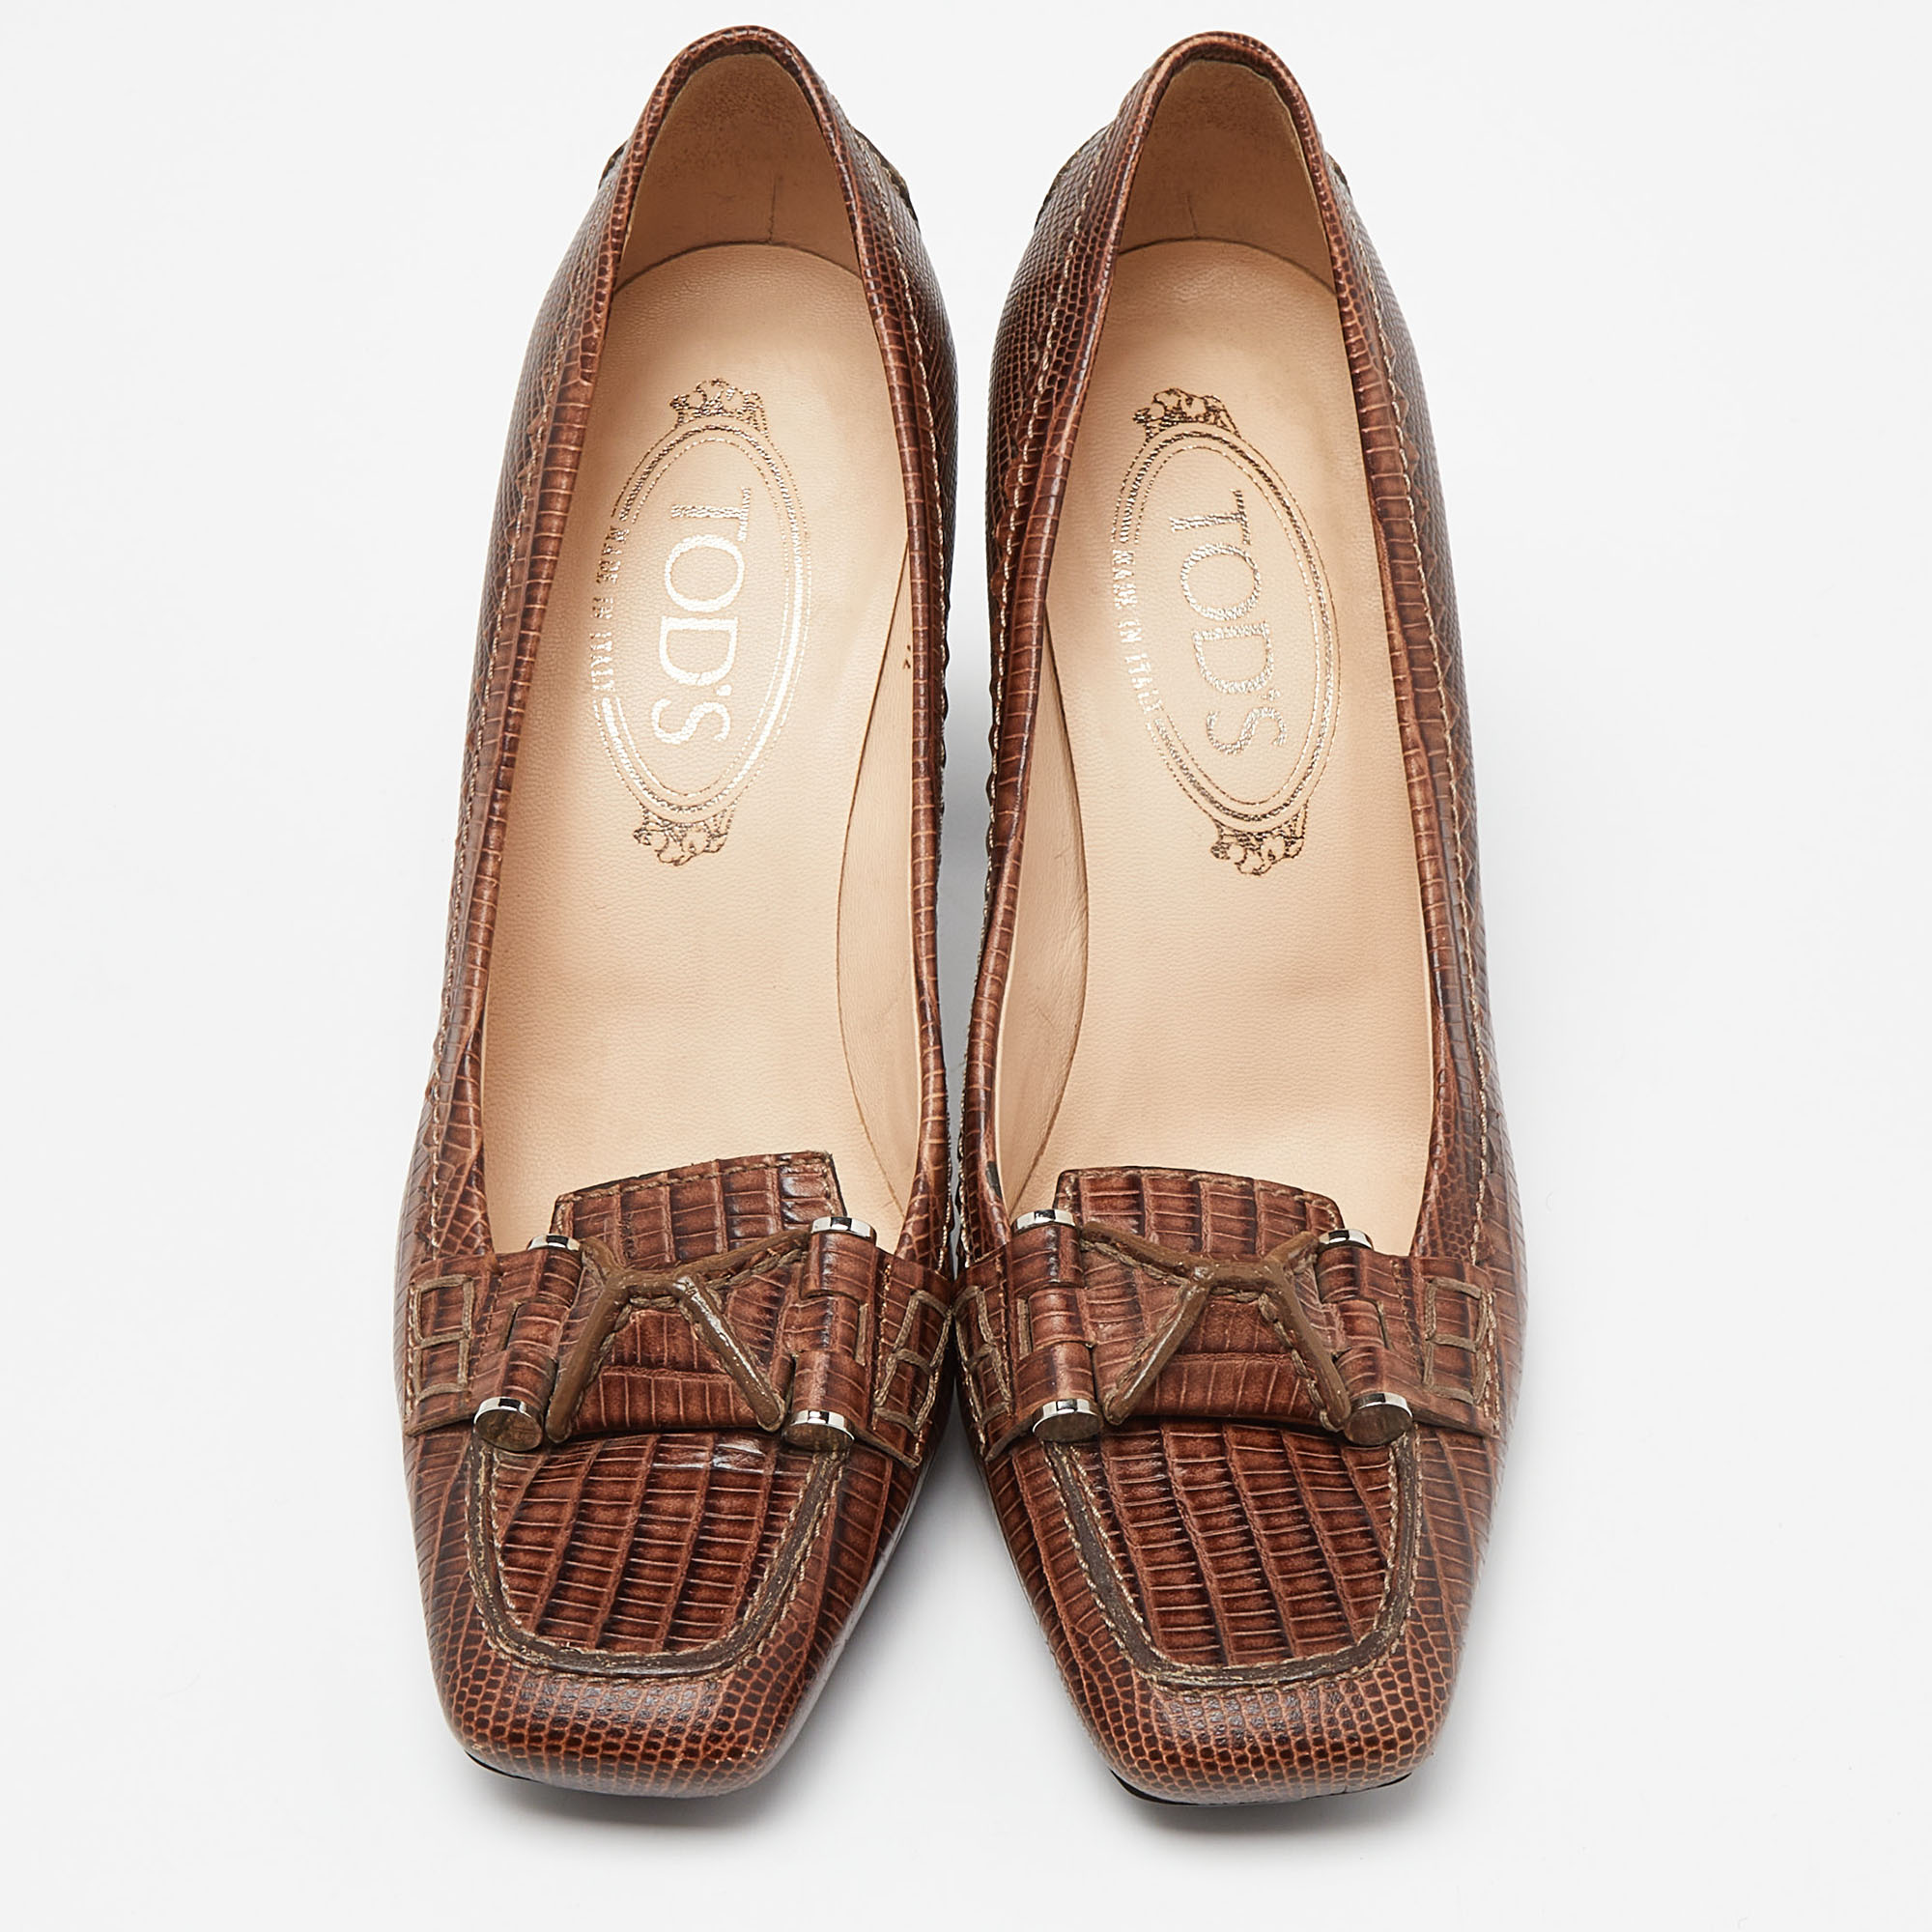 Tod's Brown Croc Embossed Leather Square Toe Loafer Pumps Size 36.5